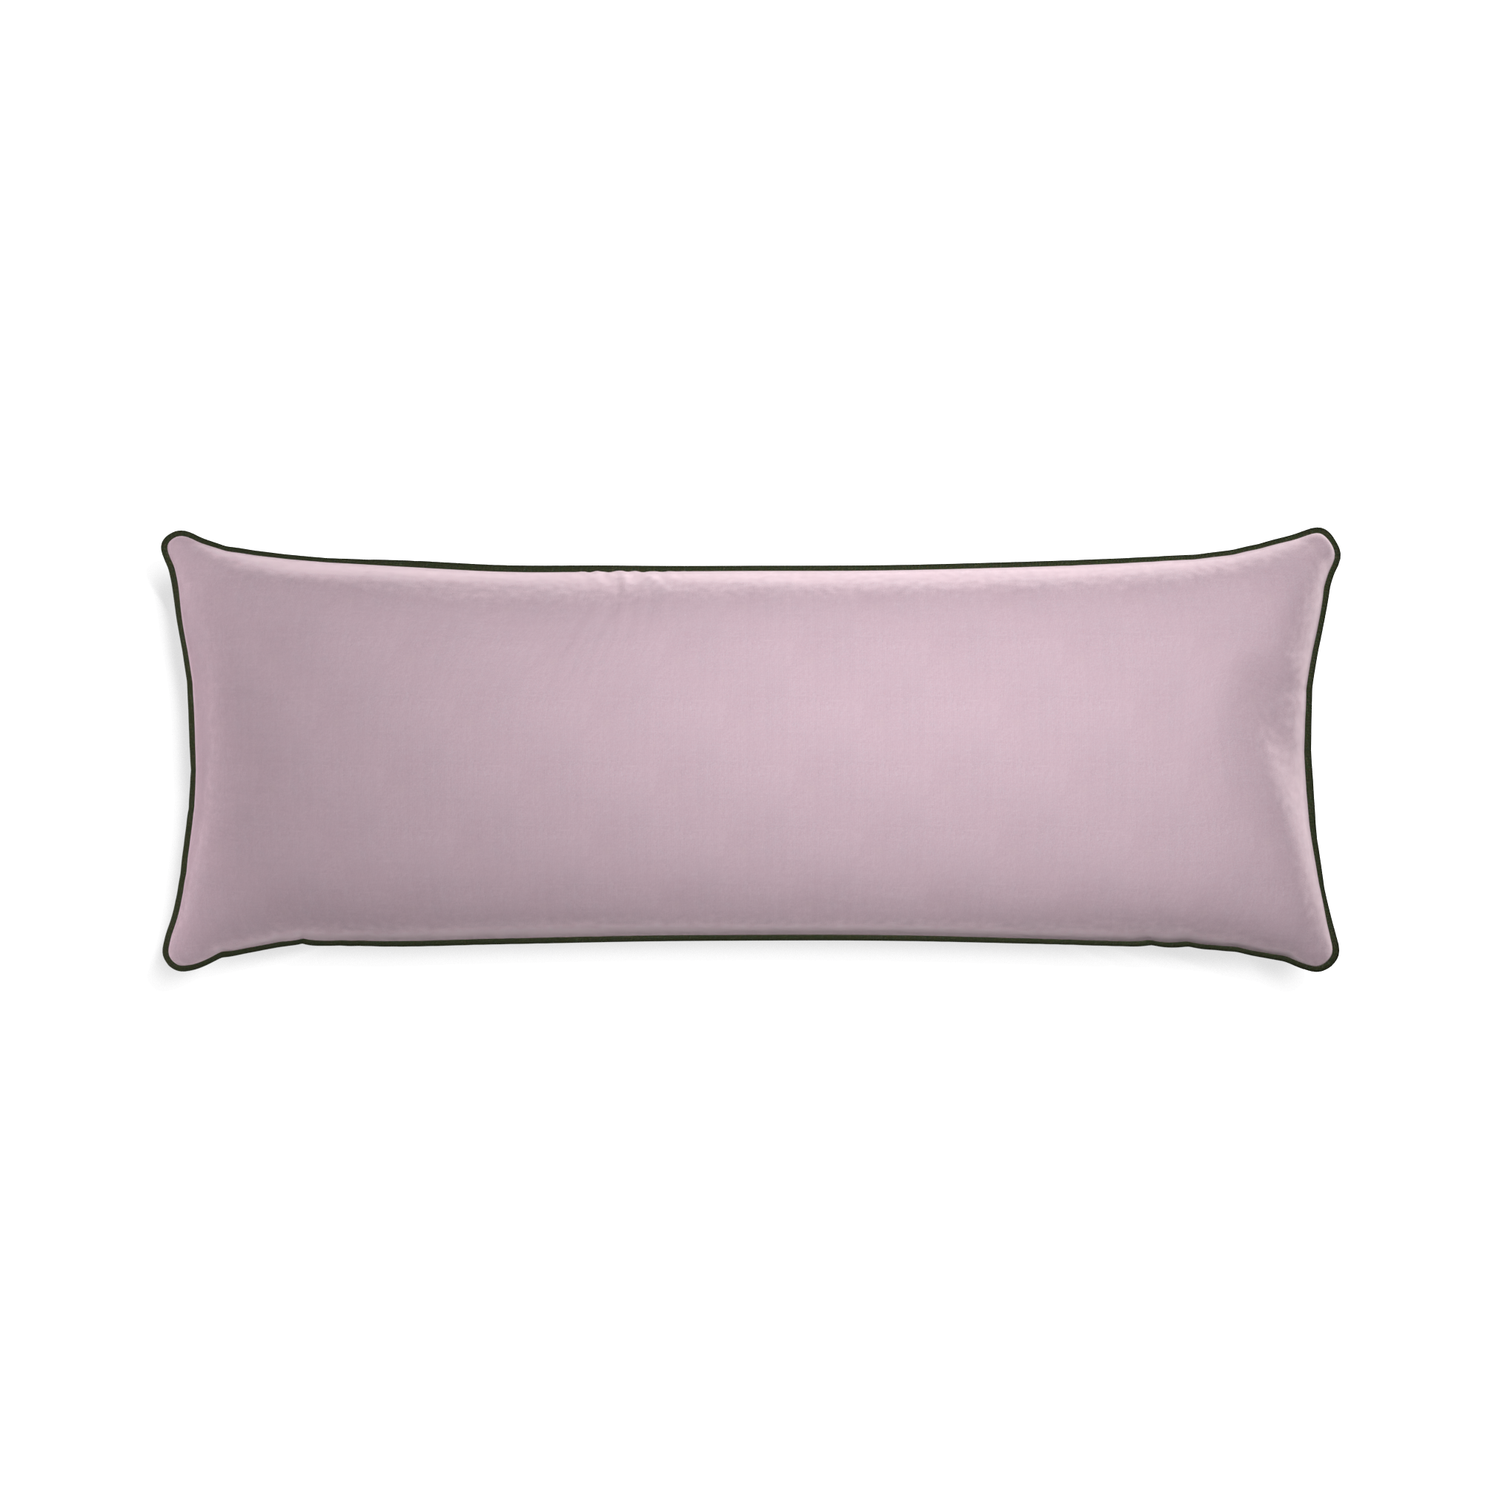 Xl-lumbar lilac velvet custom lilacpillow with f piping on white background